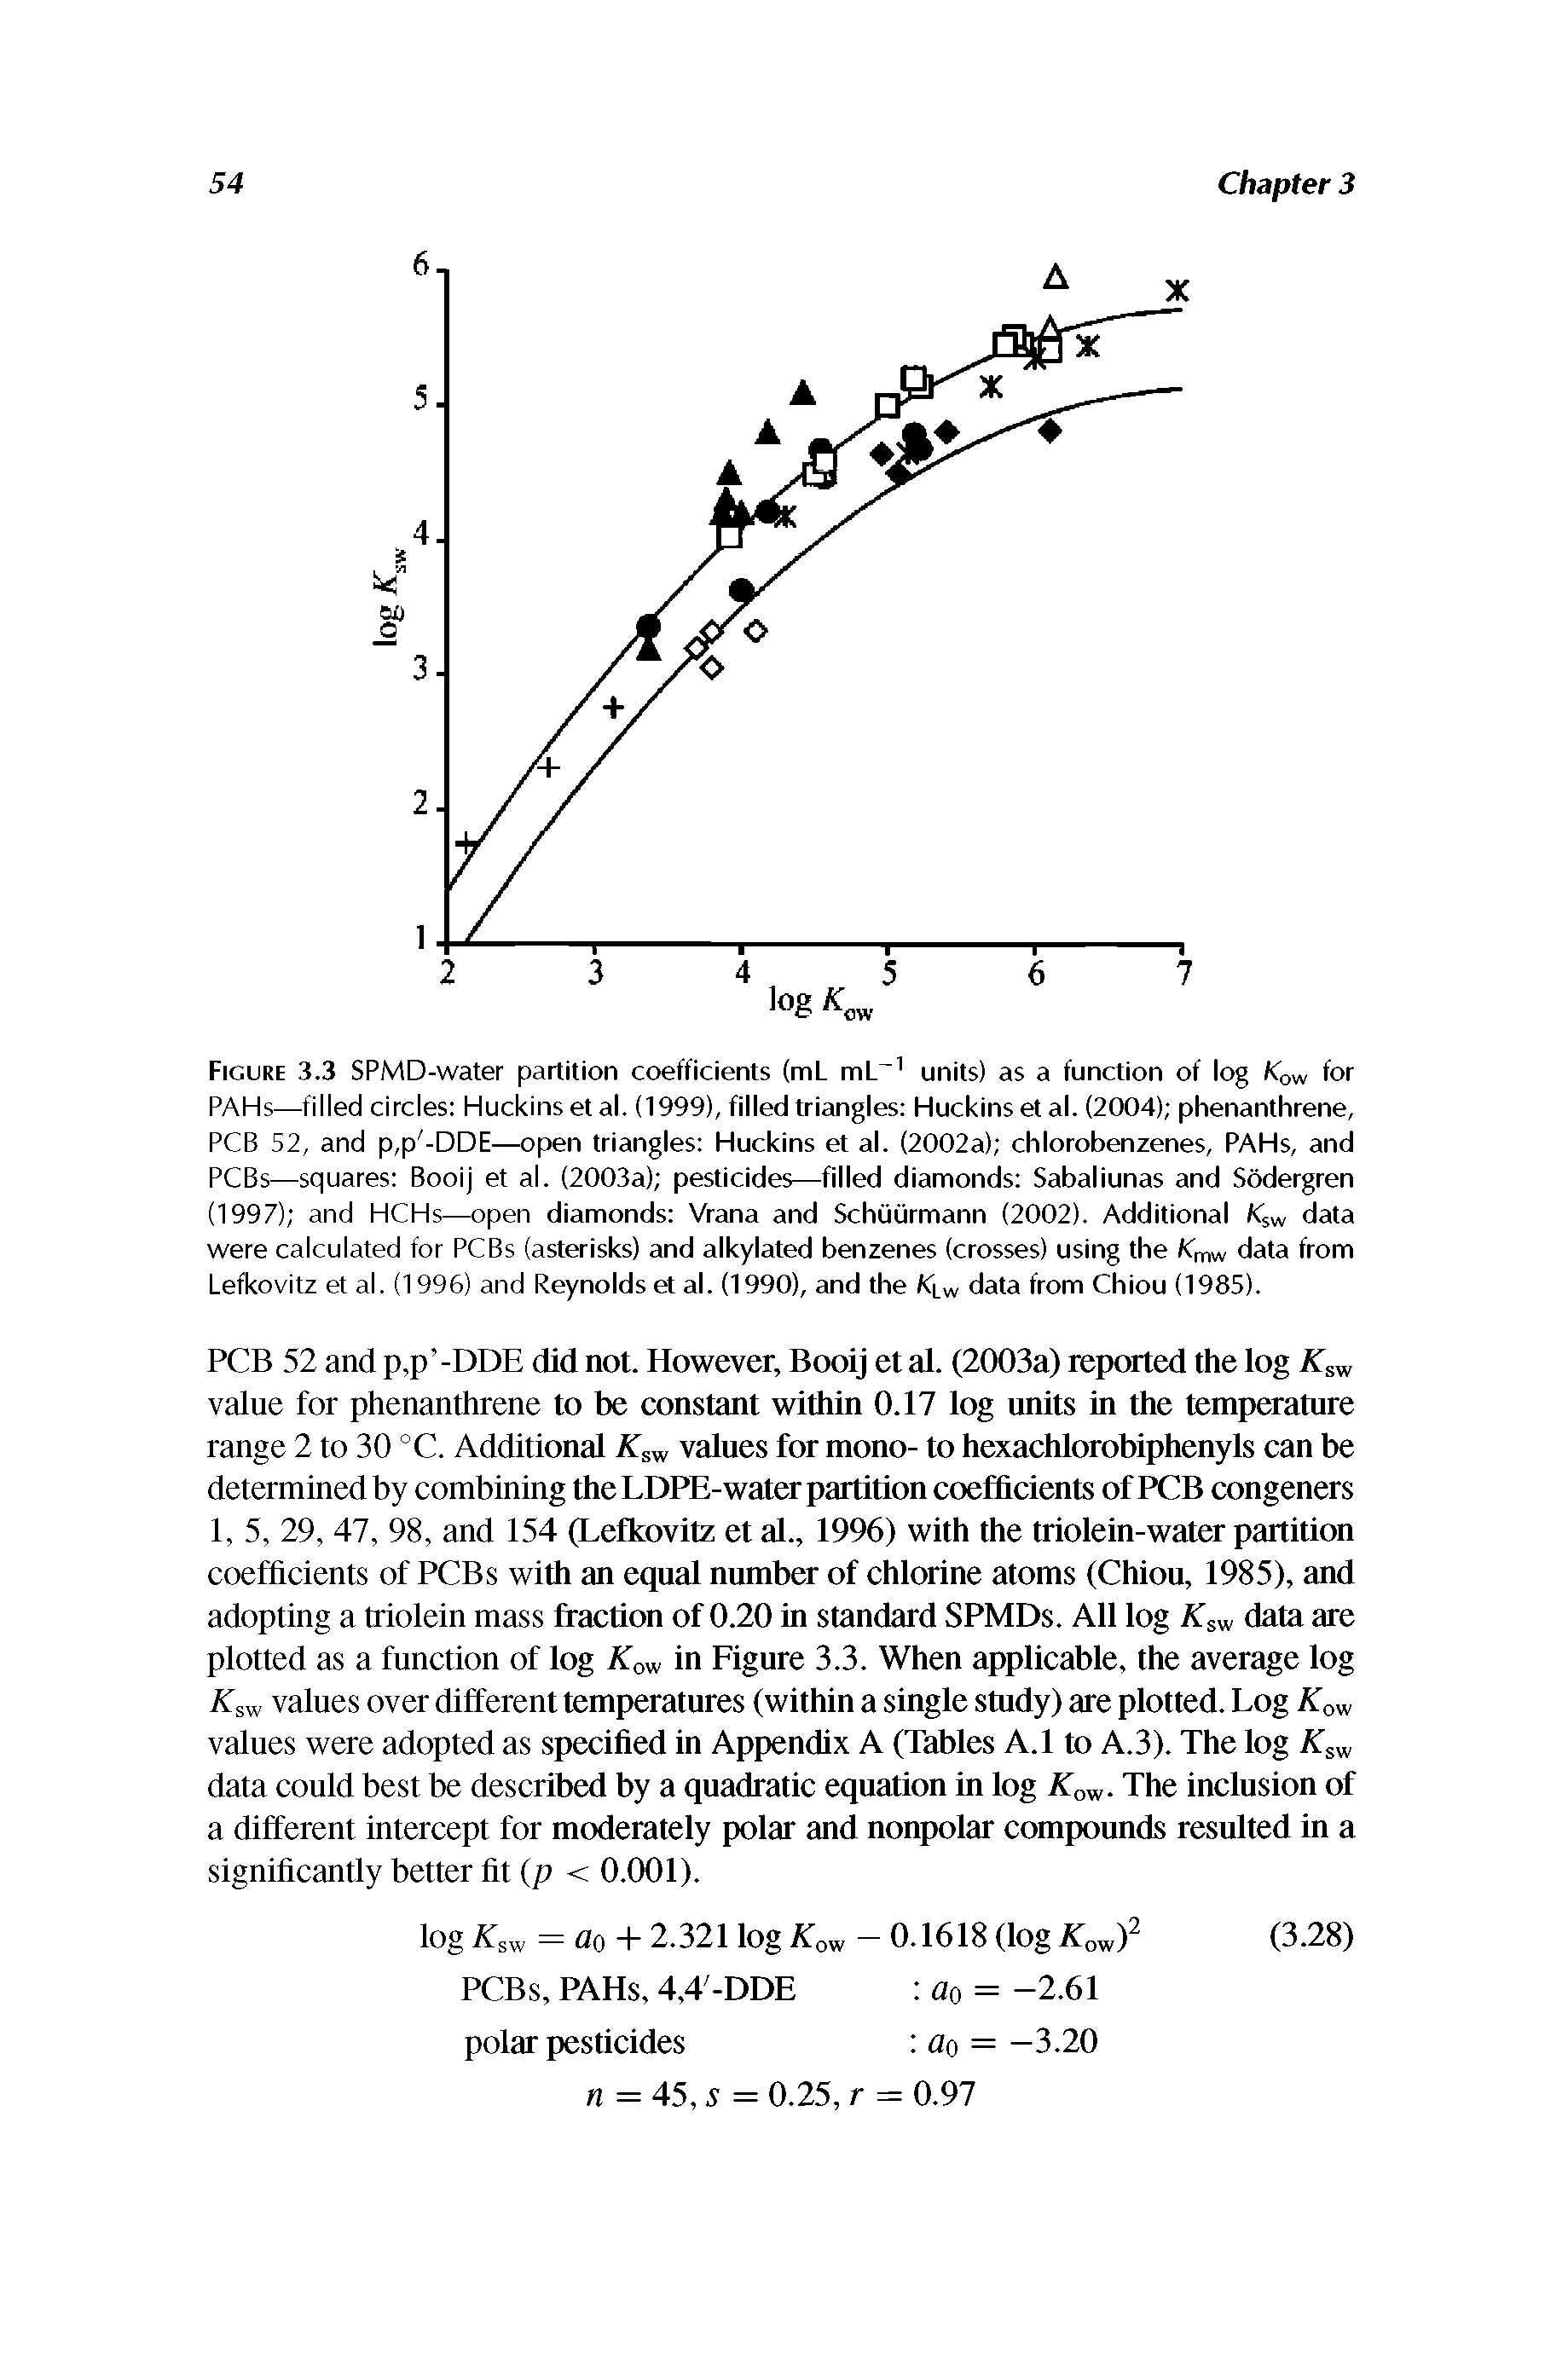 Figure 3.3 SPMD-water partition coefficients (ml mL units) as a function of log Kqw for PAHs—filled circles Huckins et al. (1999), filled triangles Huckins et al. (2004) phenanthrene, PCB 52, and p,p -DDE—open triangles Huckins et al. (2002a) chlorobenzenes, PAHs, and PCBs—squares Booij et al. (2003a) pesticides—filled diamonds Sabaliunas and Sodergren (1997) and HCHs—open diamonds Vrana and Schiiurmann (2002). Additional kjw data were calculated for PCBs (asterisks) and alkylated benzenes (crosses) using the fCmw data from Lefkovitz et al. (1996) and Reynolds et al. (1990), and the data from Chiou (1985).